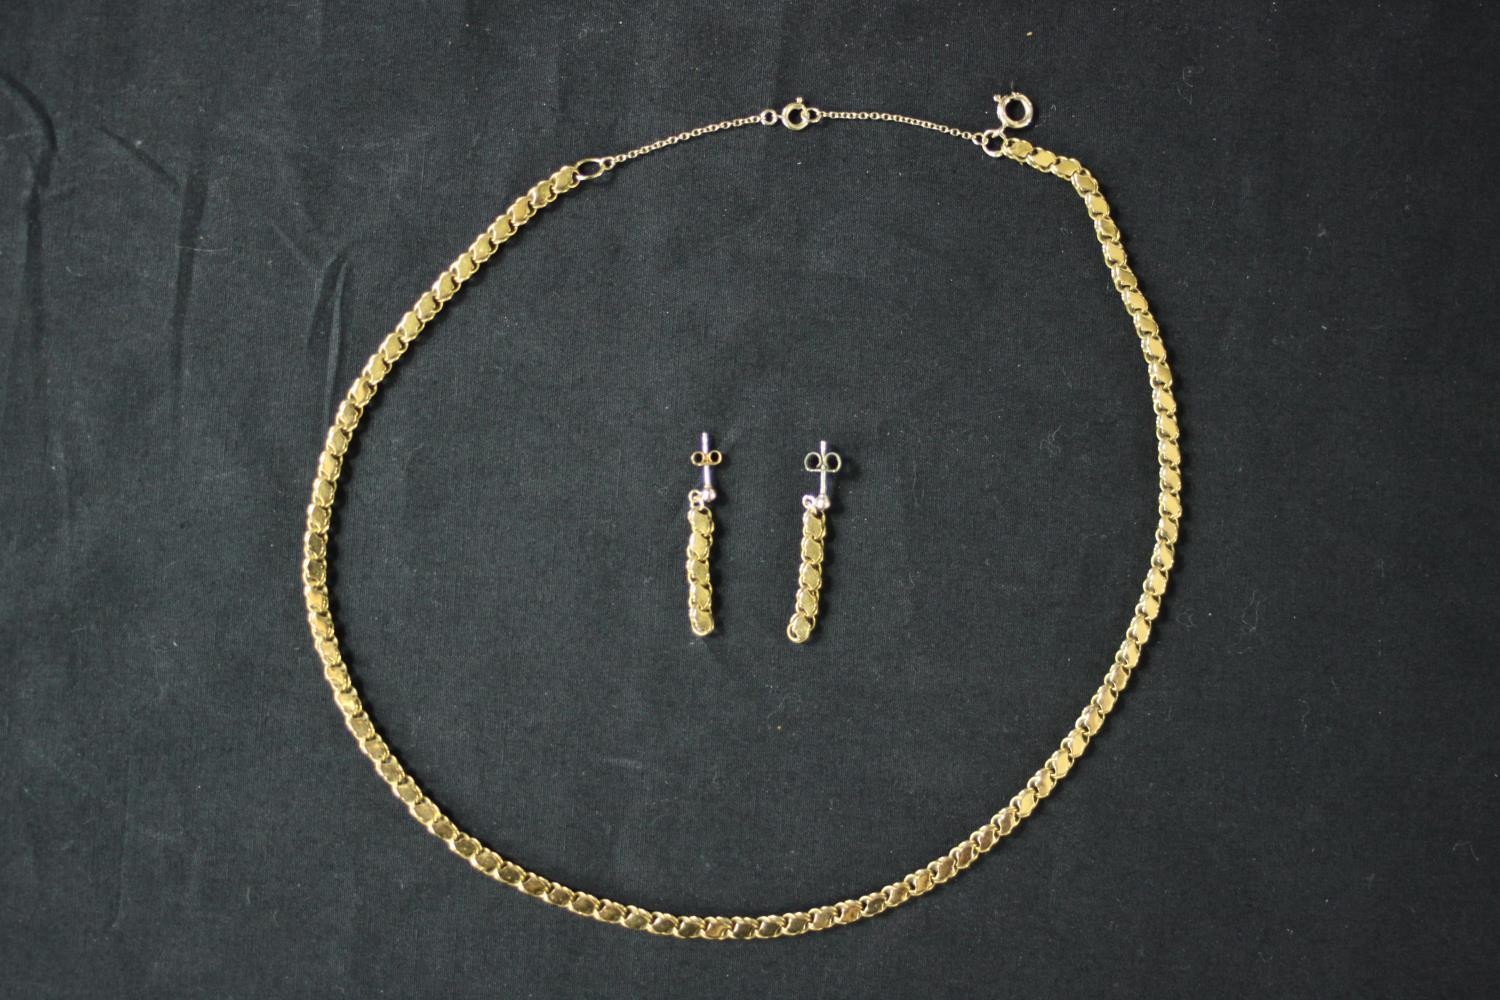 A 16 inch fancy s-link yellow metal (tests as 14ct) chain with a pair of matching earrings. The - Image 2 of 8